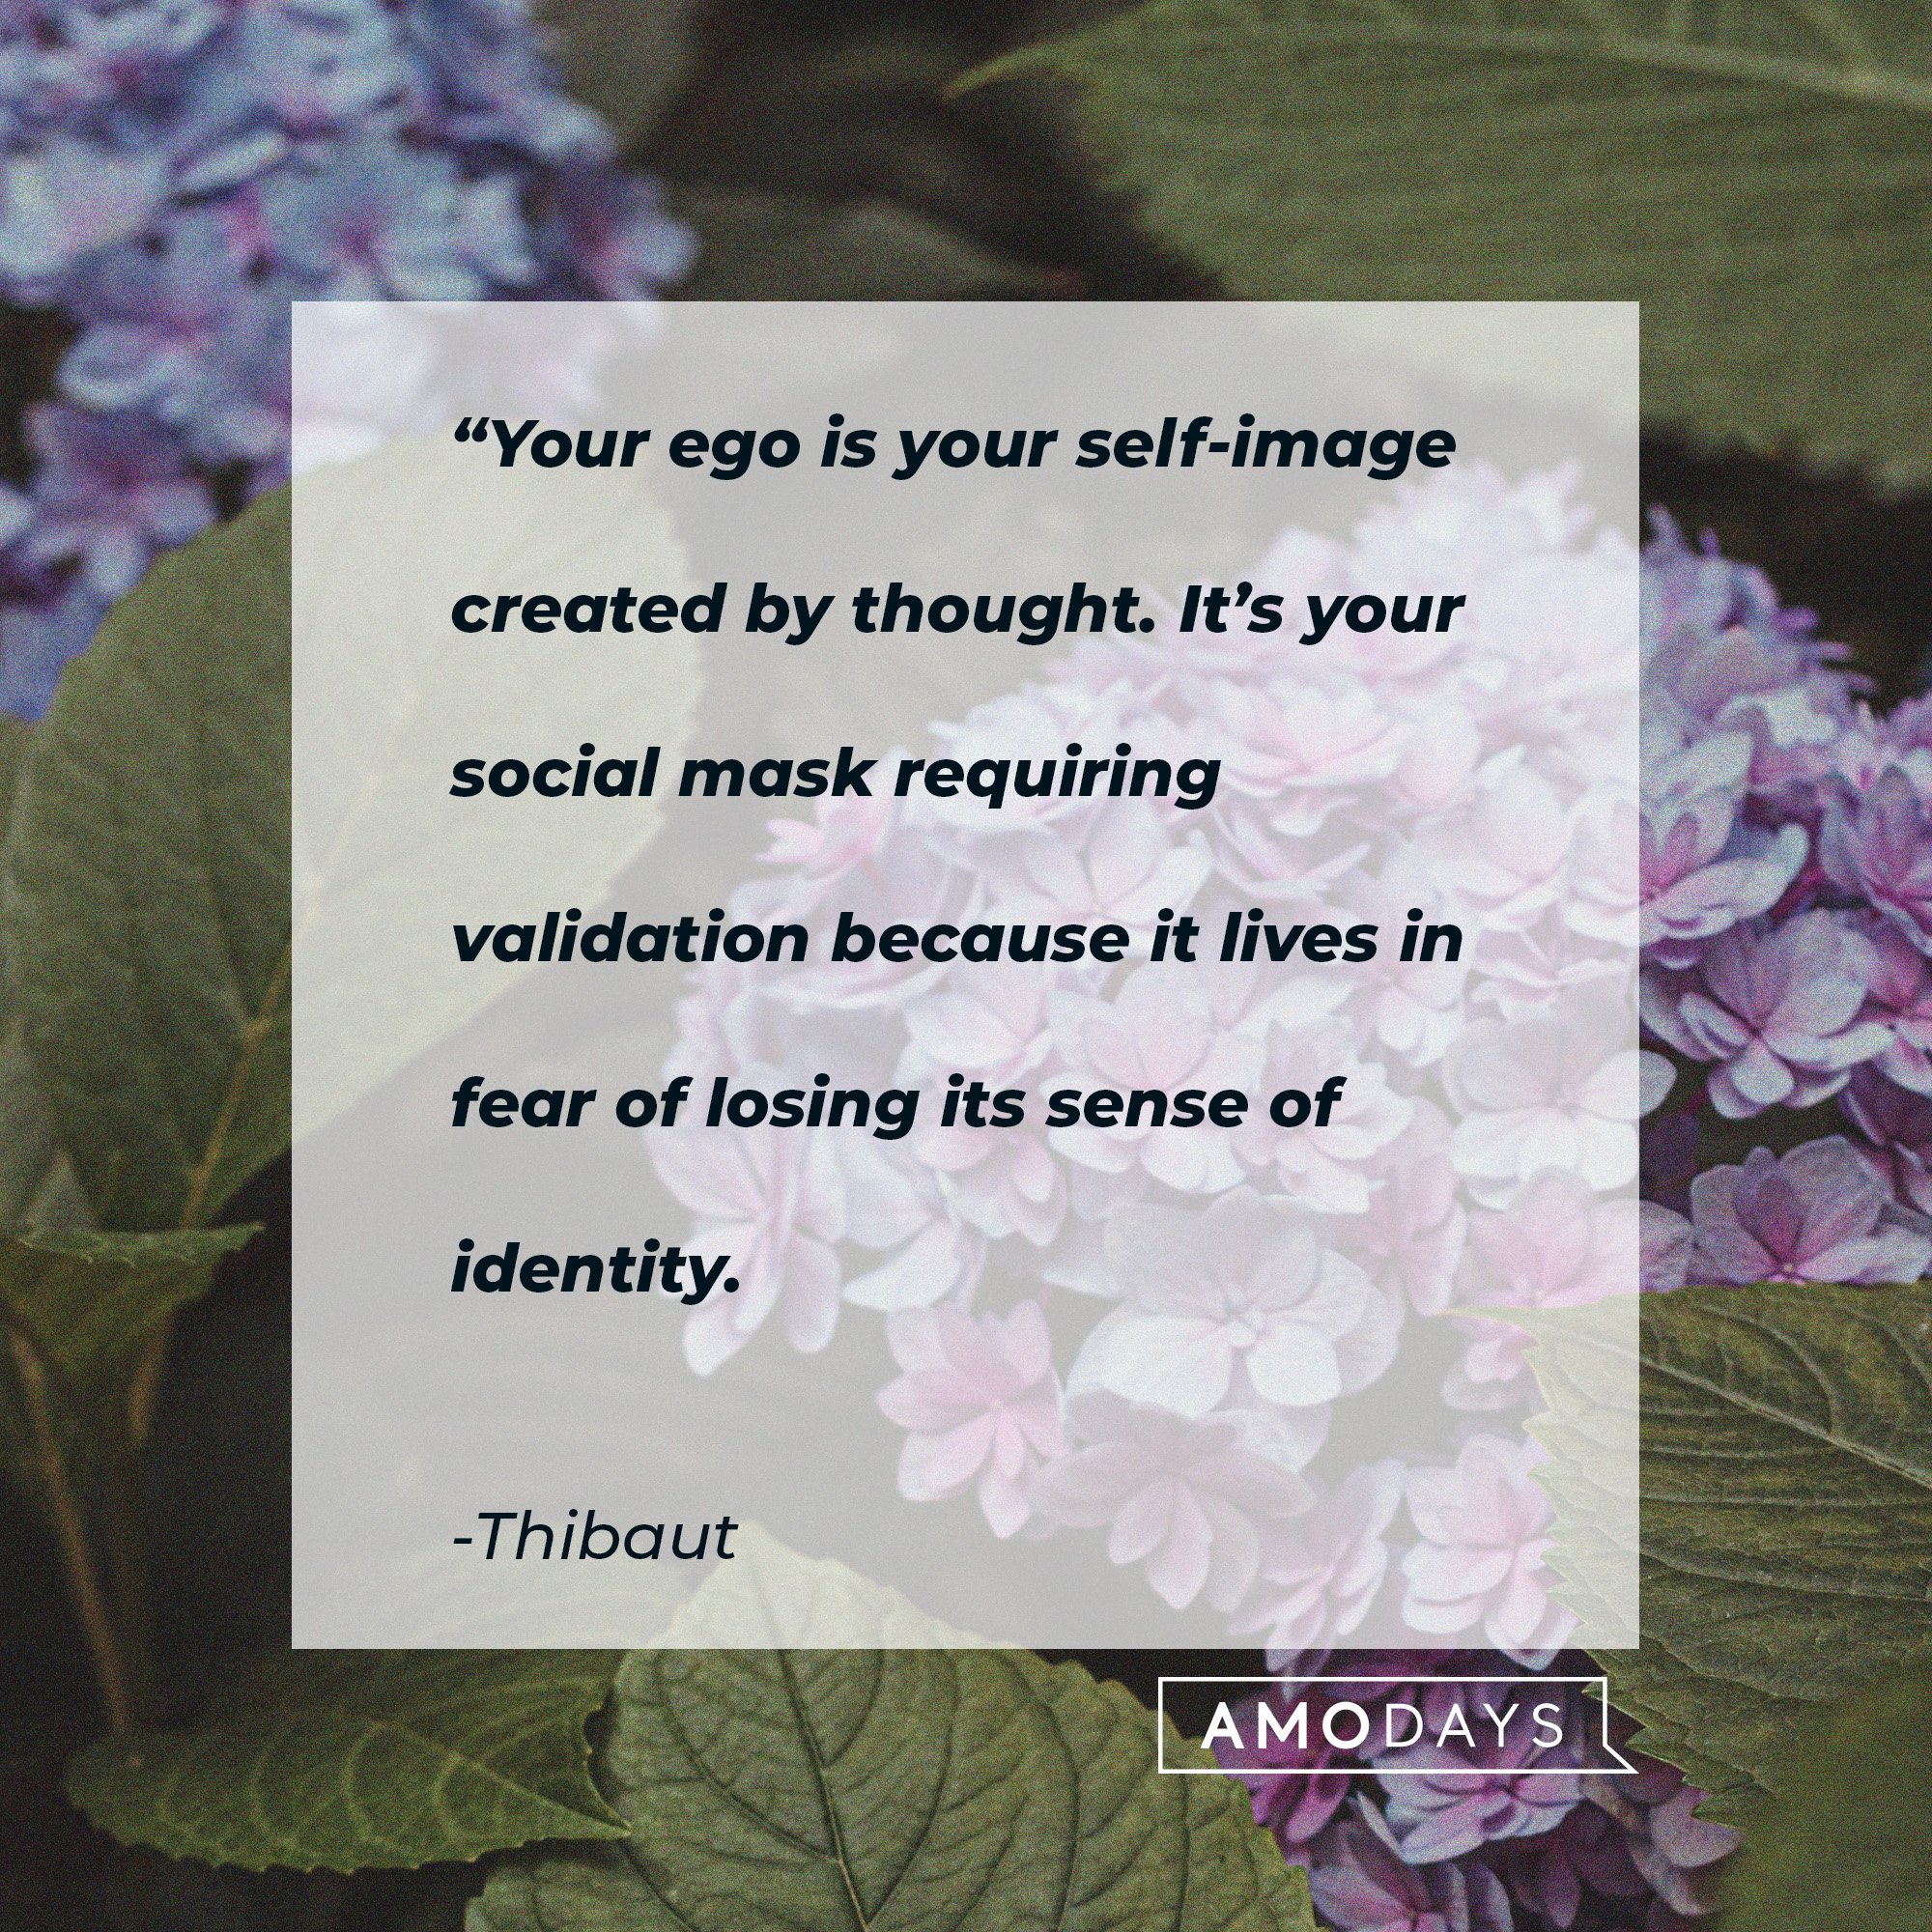 Thibaut's quote: “Your ego is your self-image created by thought. It’s your social mask requiring validation because it lives in fear of losing its sense of identity." | Image: AmoDays